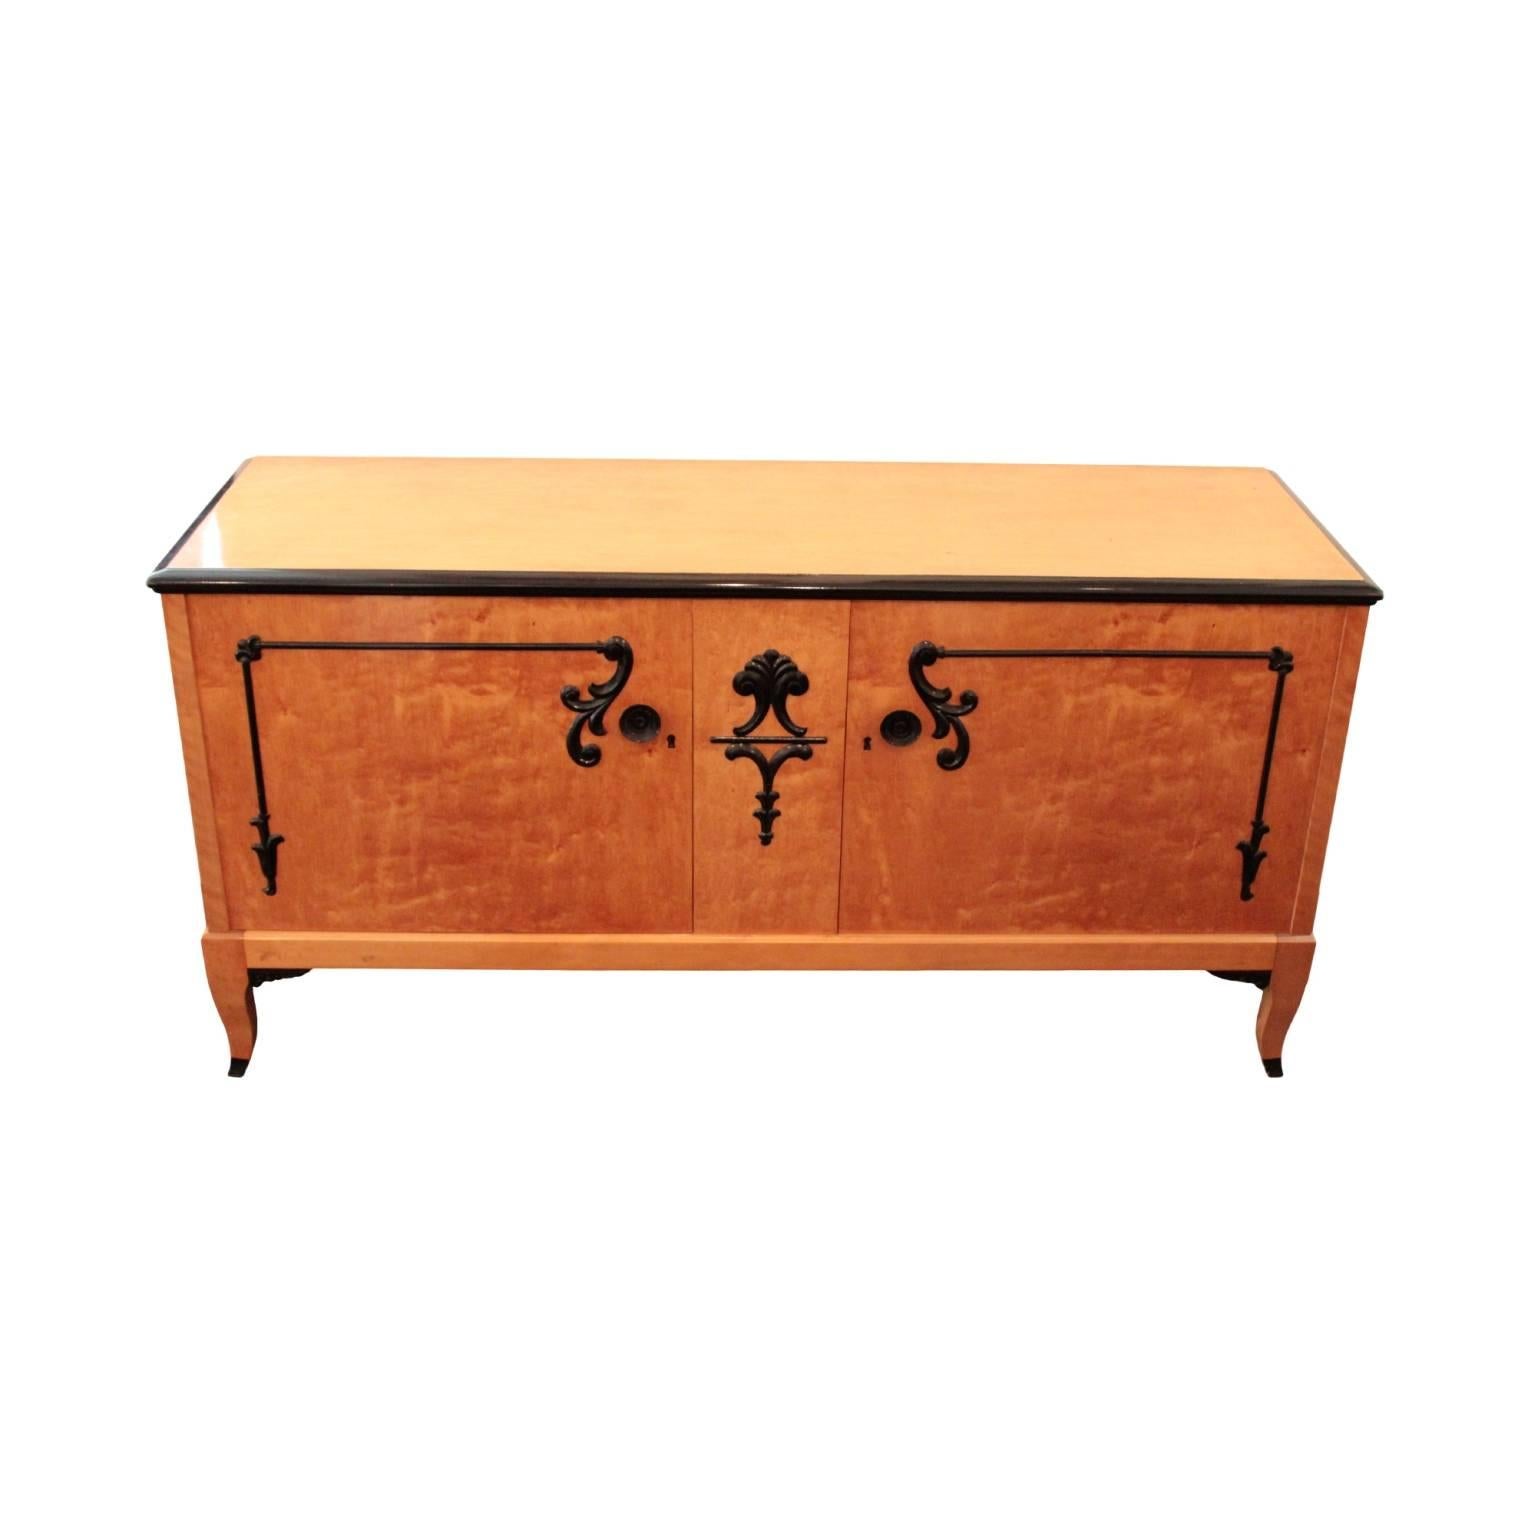 Top with ebonized molded edge resting on a corpus featuring pair of doors and middle segment decorated with ebonized moldings and carvings depicting acanthus and anthemion leaves. Interior in birch, right cabinet with one drawer and storage space;